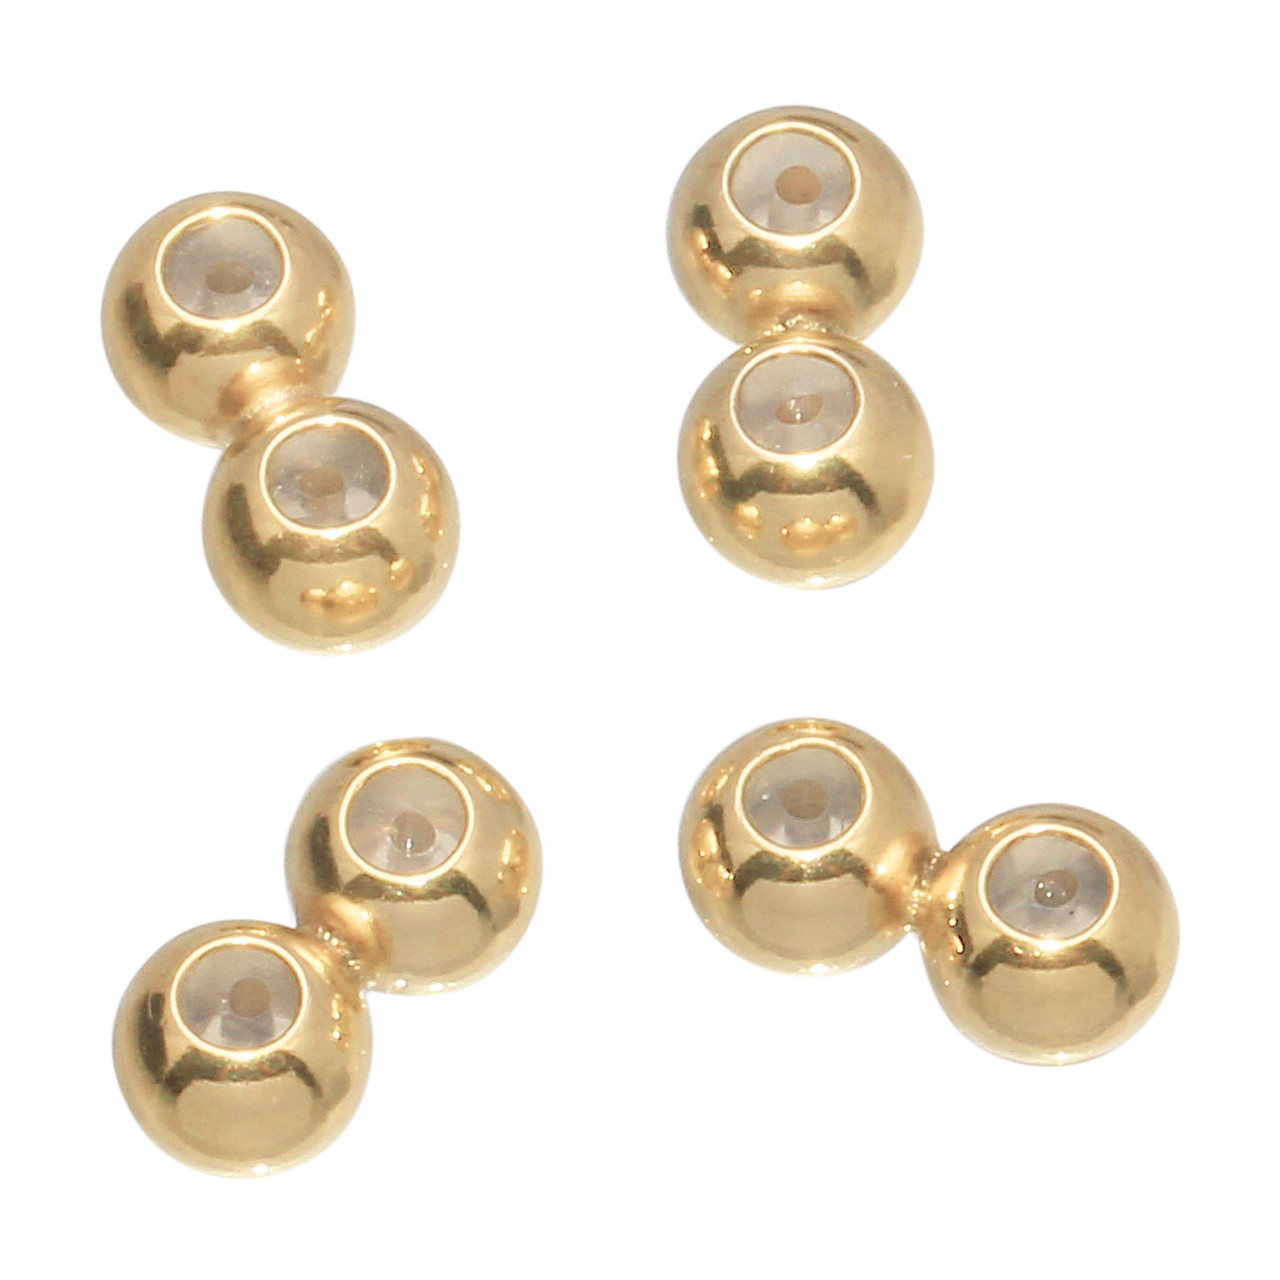 Metallic Gold Silicone Beads  Loose Silicone Beads are available